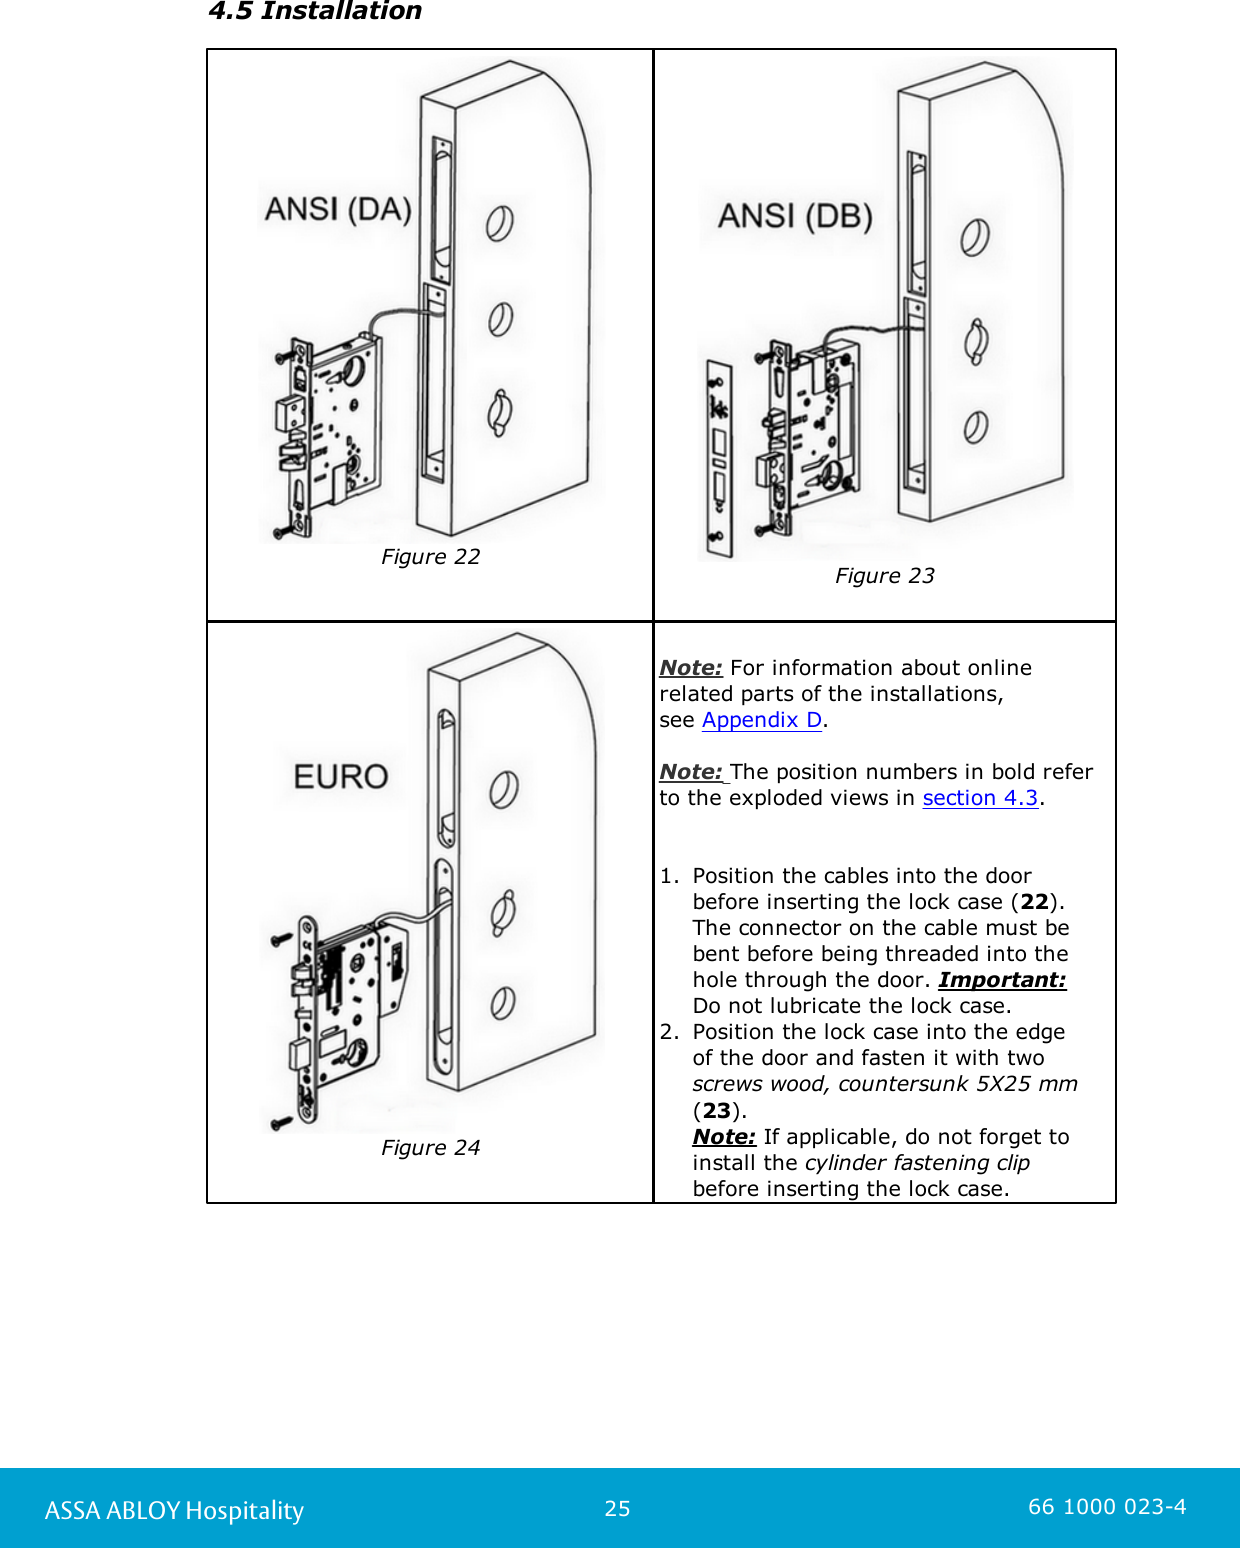 25ASSA ABLOY Hospitality 66 1000 023-44.5 InstallationFigure 22Figure 23Figure 24Note: For information about onlinerelated parts of the installations, see Appendix D.Note: The position numbers in bold referto the exploded views in section 4.3. 1. Position the cables into the door before inserting the lock case (22). The connector on the cable must bebent before being threaded into thehole through the door. Important: Do not lubricate the lock case. 2. Position the lock case into the edge of the door and fasten it with two screws wood, countersunk 5X25 mm(23). Note: If applicable, do not forget toinstall the cylinder fastening clip before inserting the lock case. 